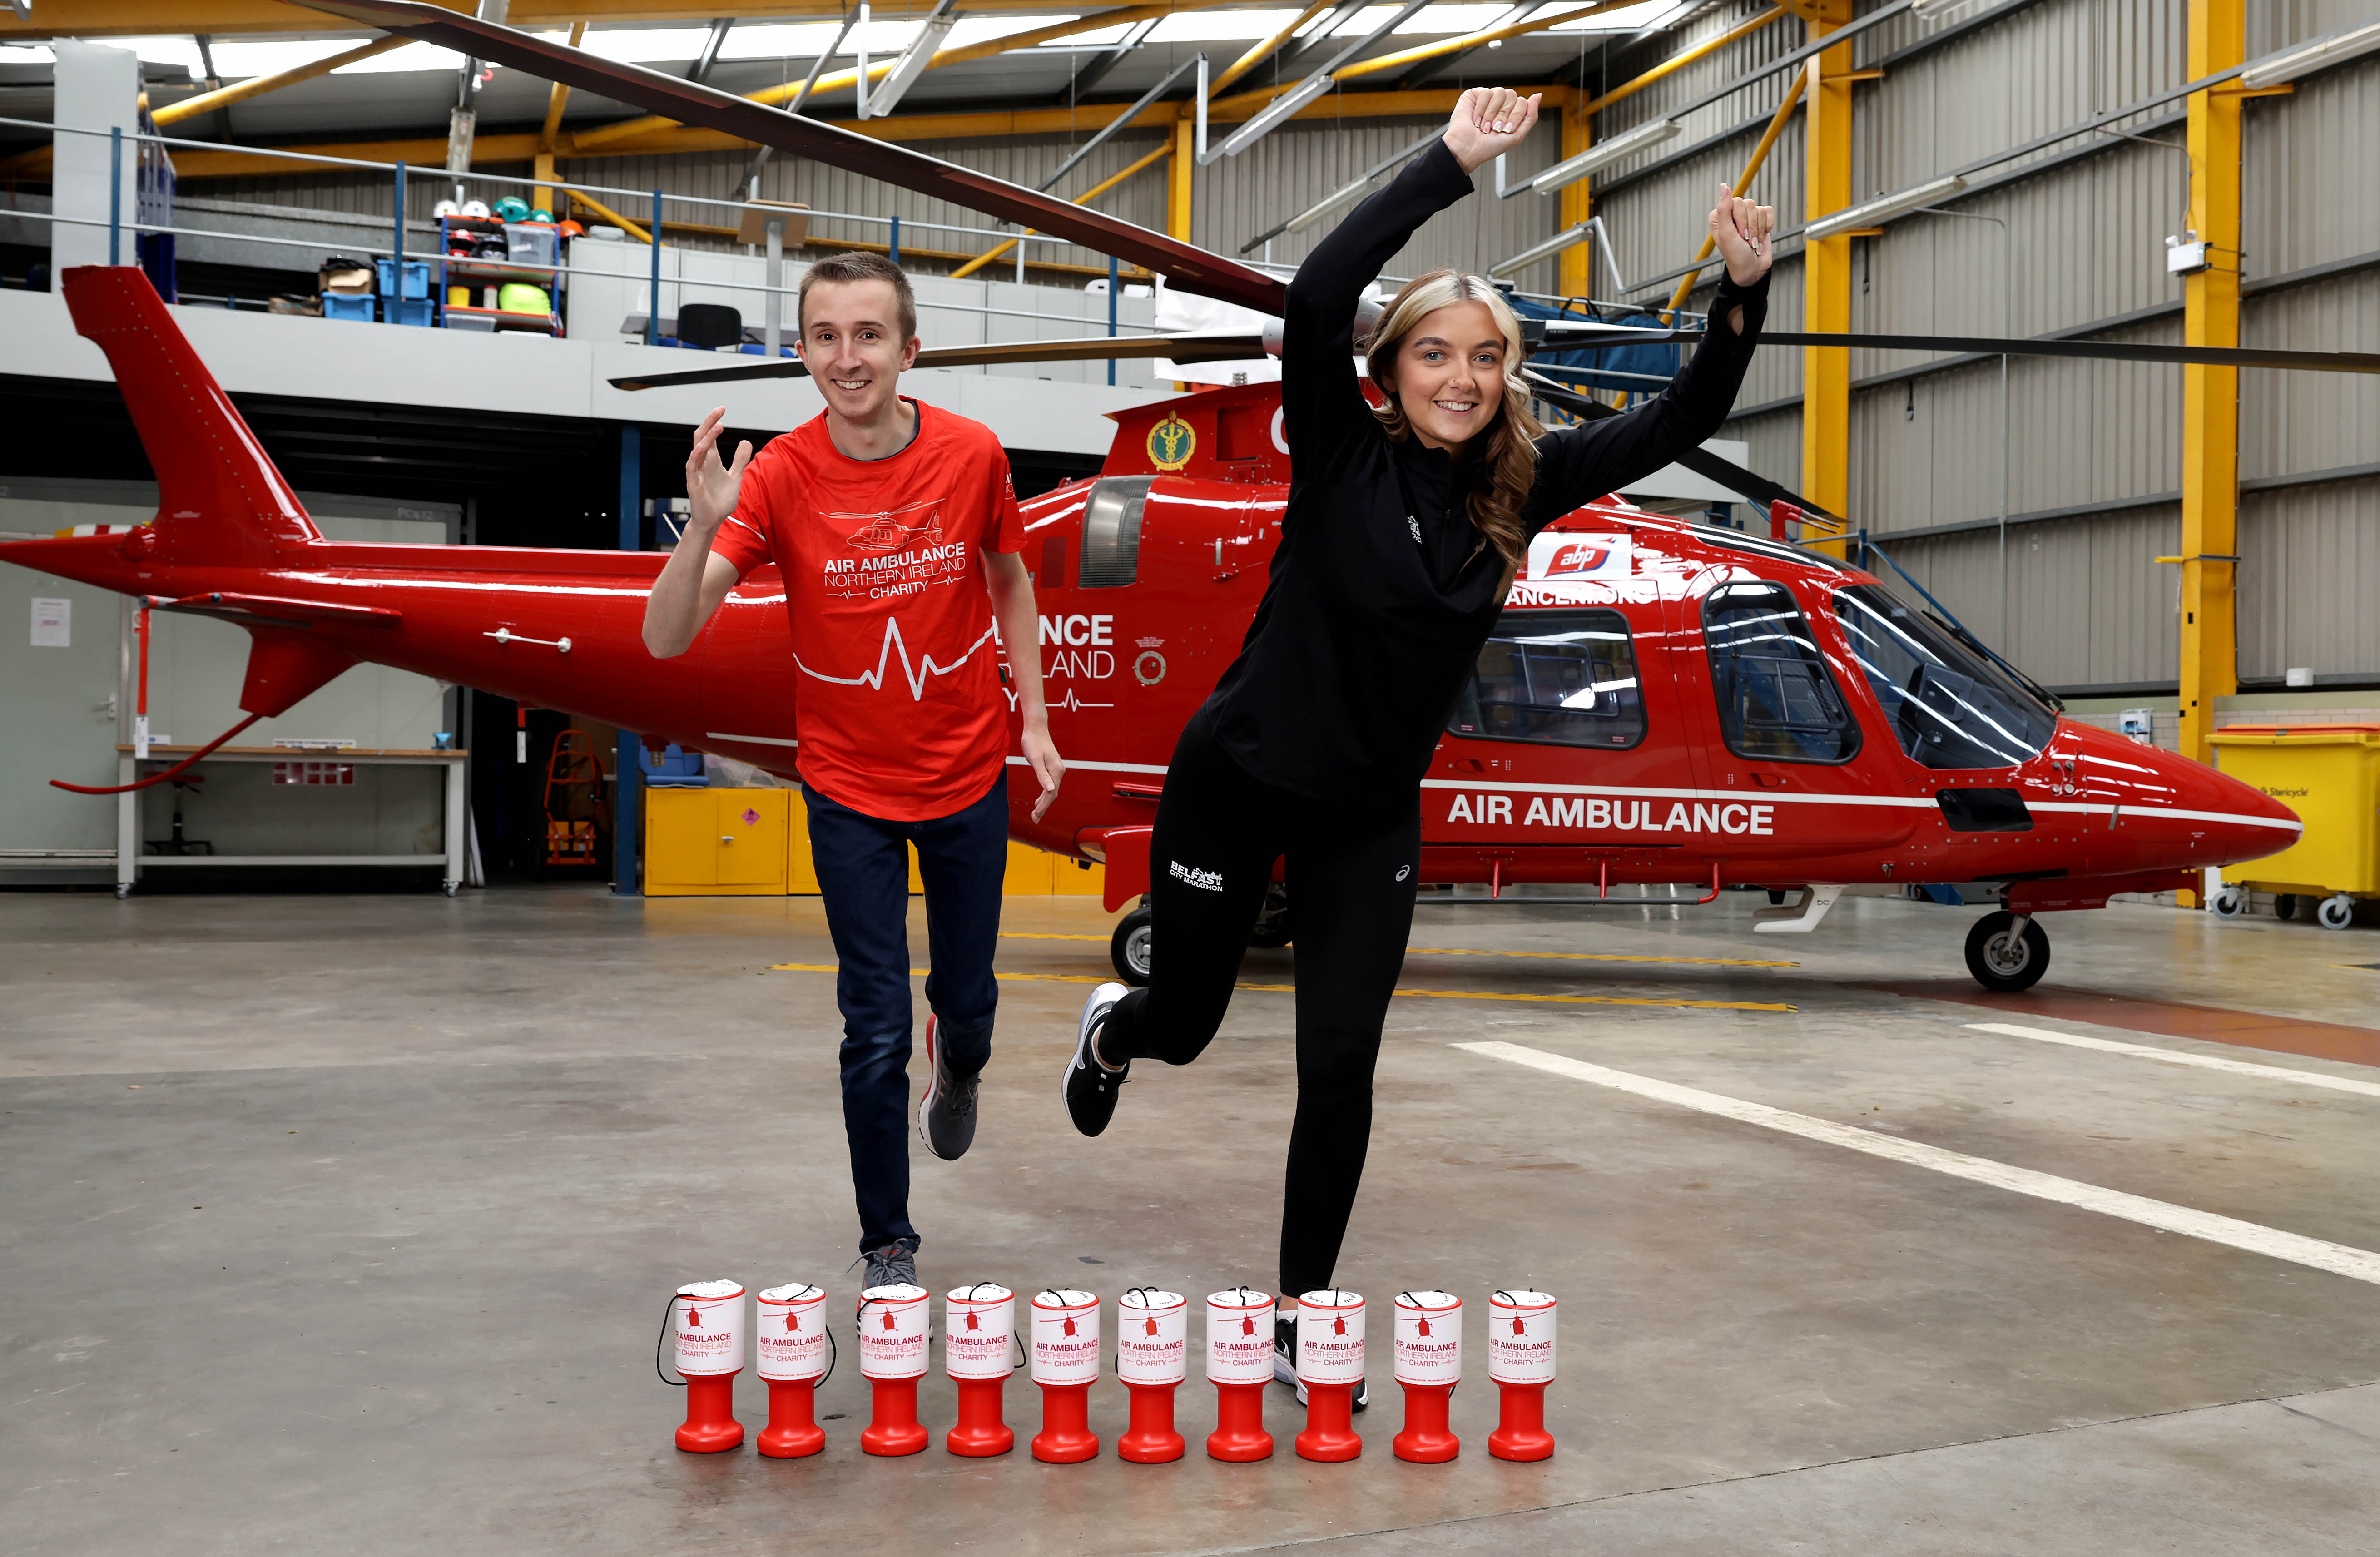 Turn your miles into something life-saving, and run for Air Ambulance Northern Ireland 